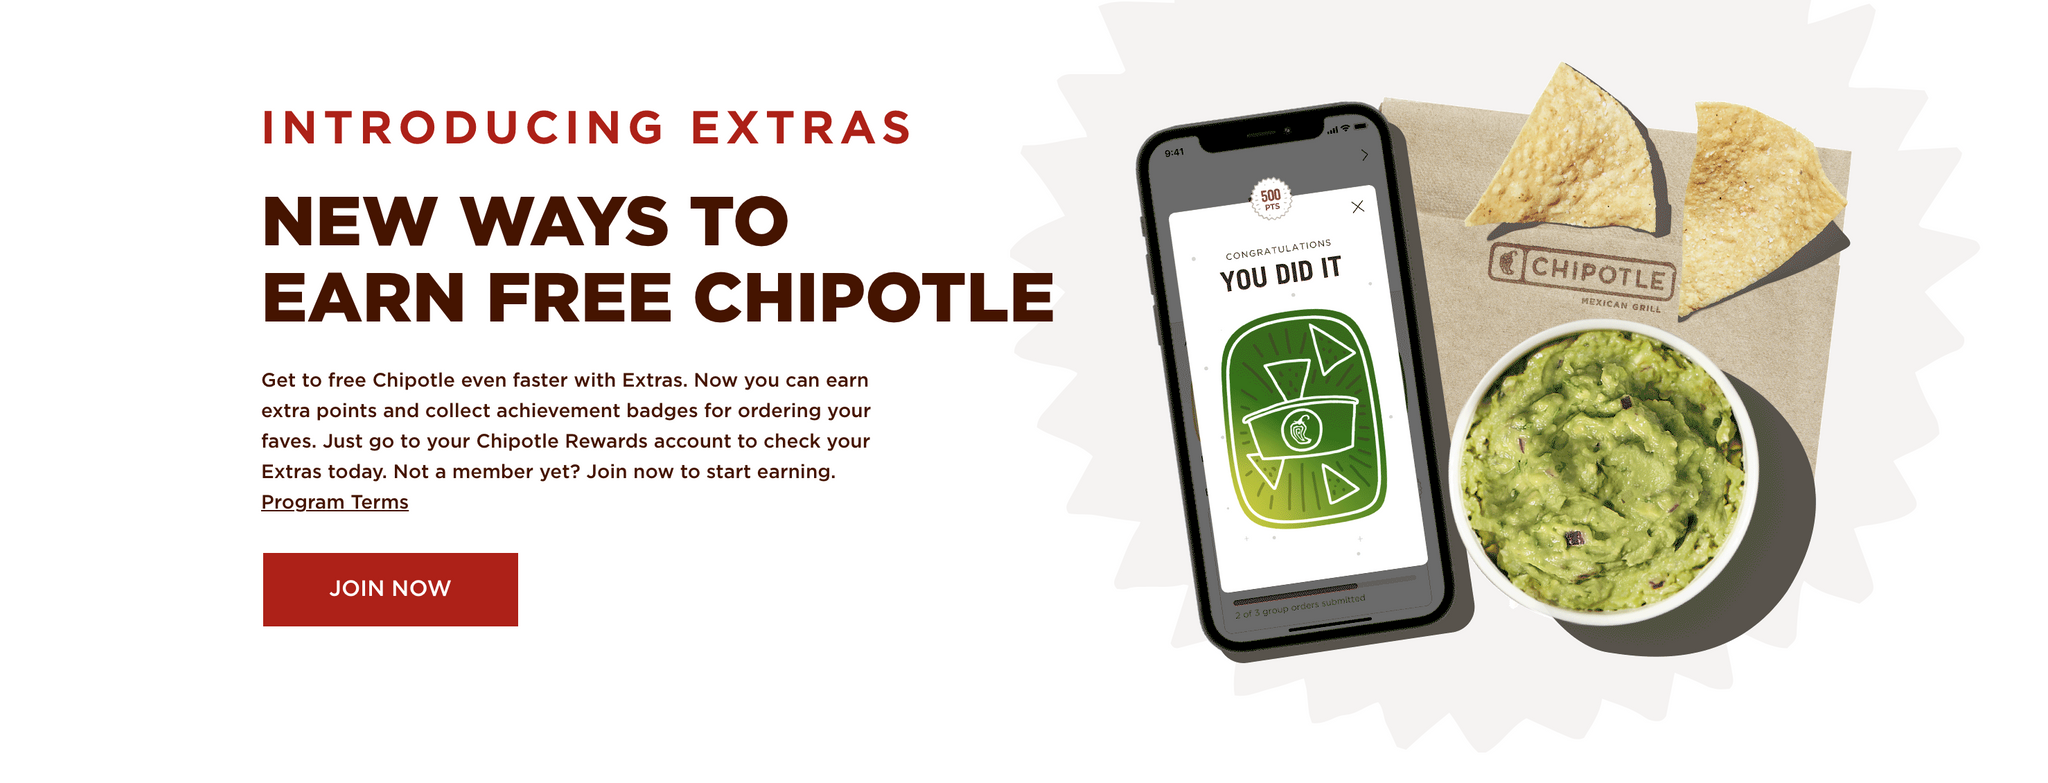 Chipotle: winning loyalty through gamification